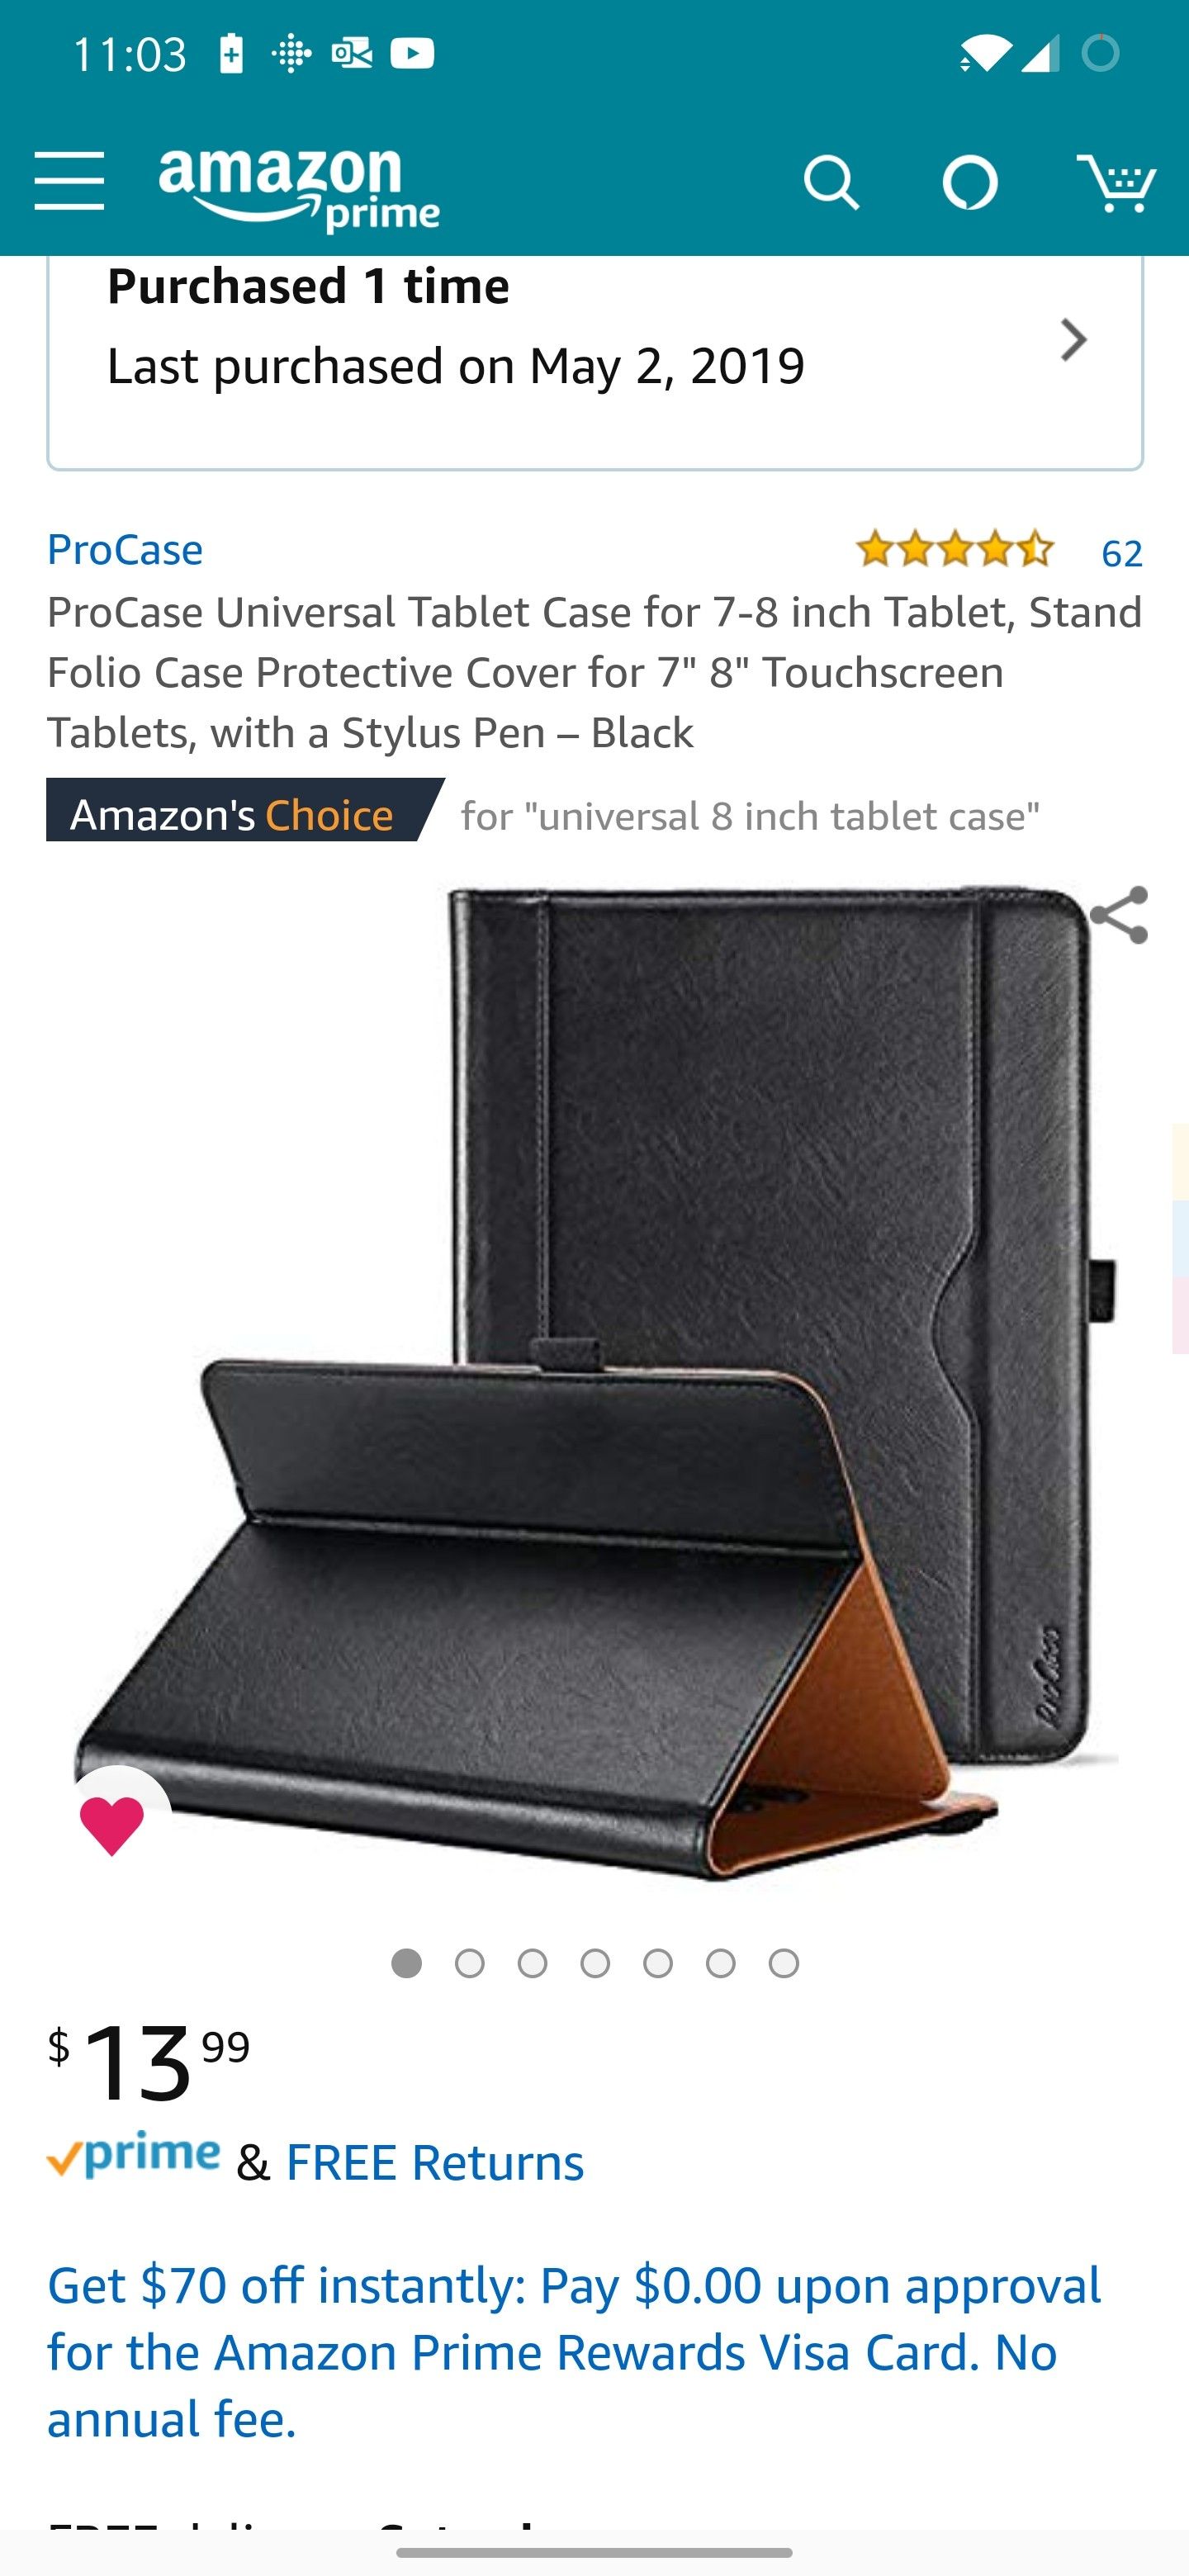 ProCase Universal Tablet Case for 7-8 inch Tablet, Stand Folio Case Protective Cover for 7" 8" Touchscreen Tablets, with a Stylus Pen – Black